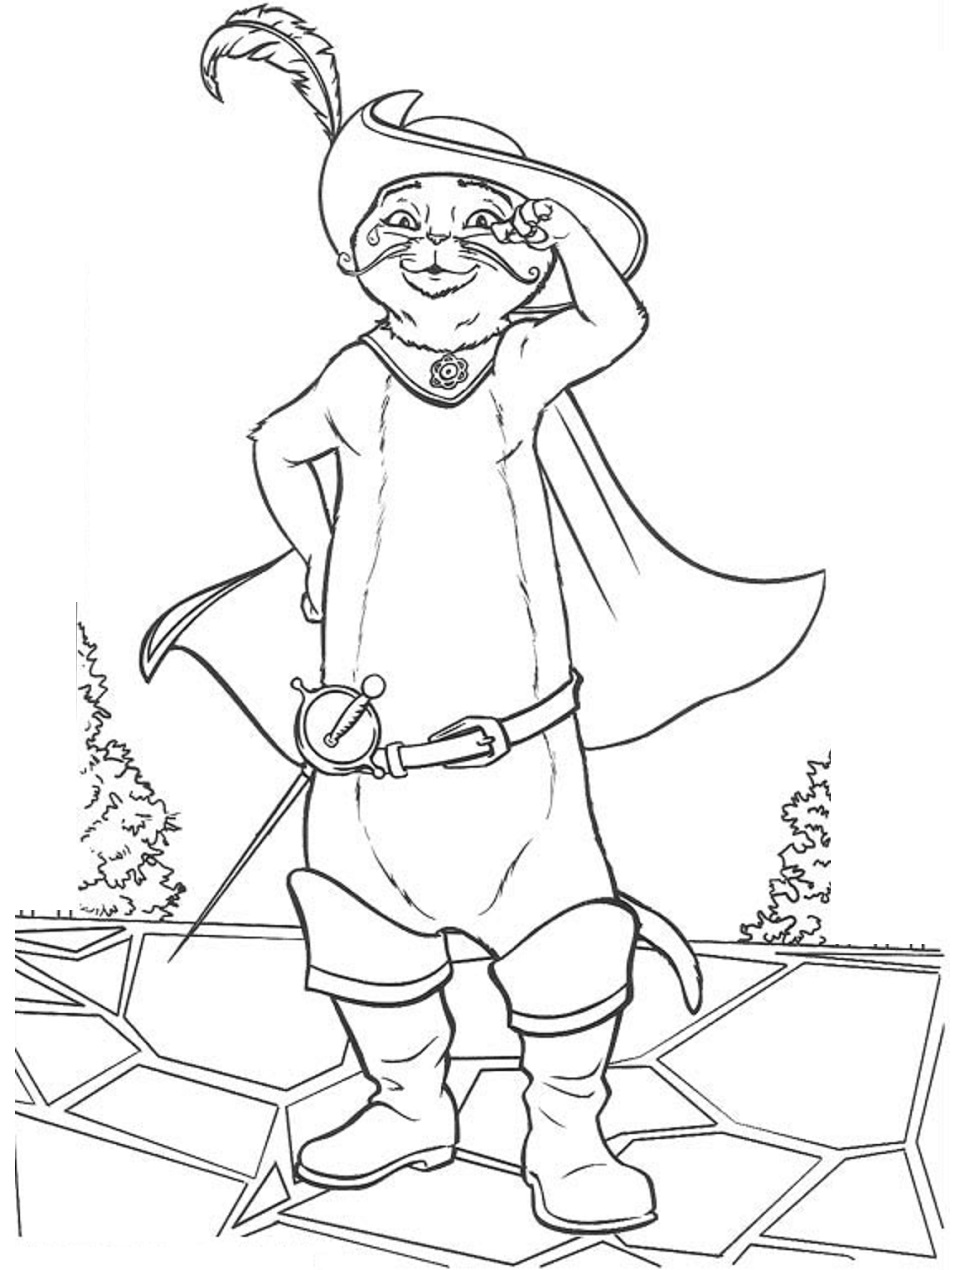 Puss in Boots The Last Wish Coloring sheets - SheetalColor.com